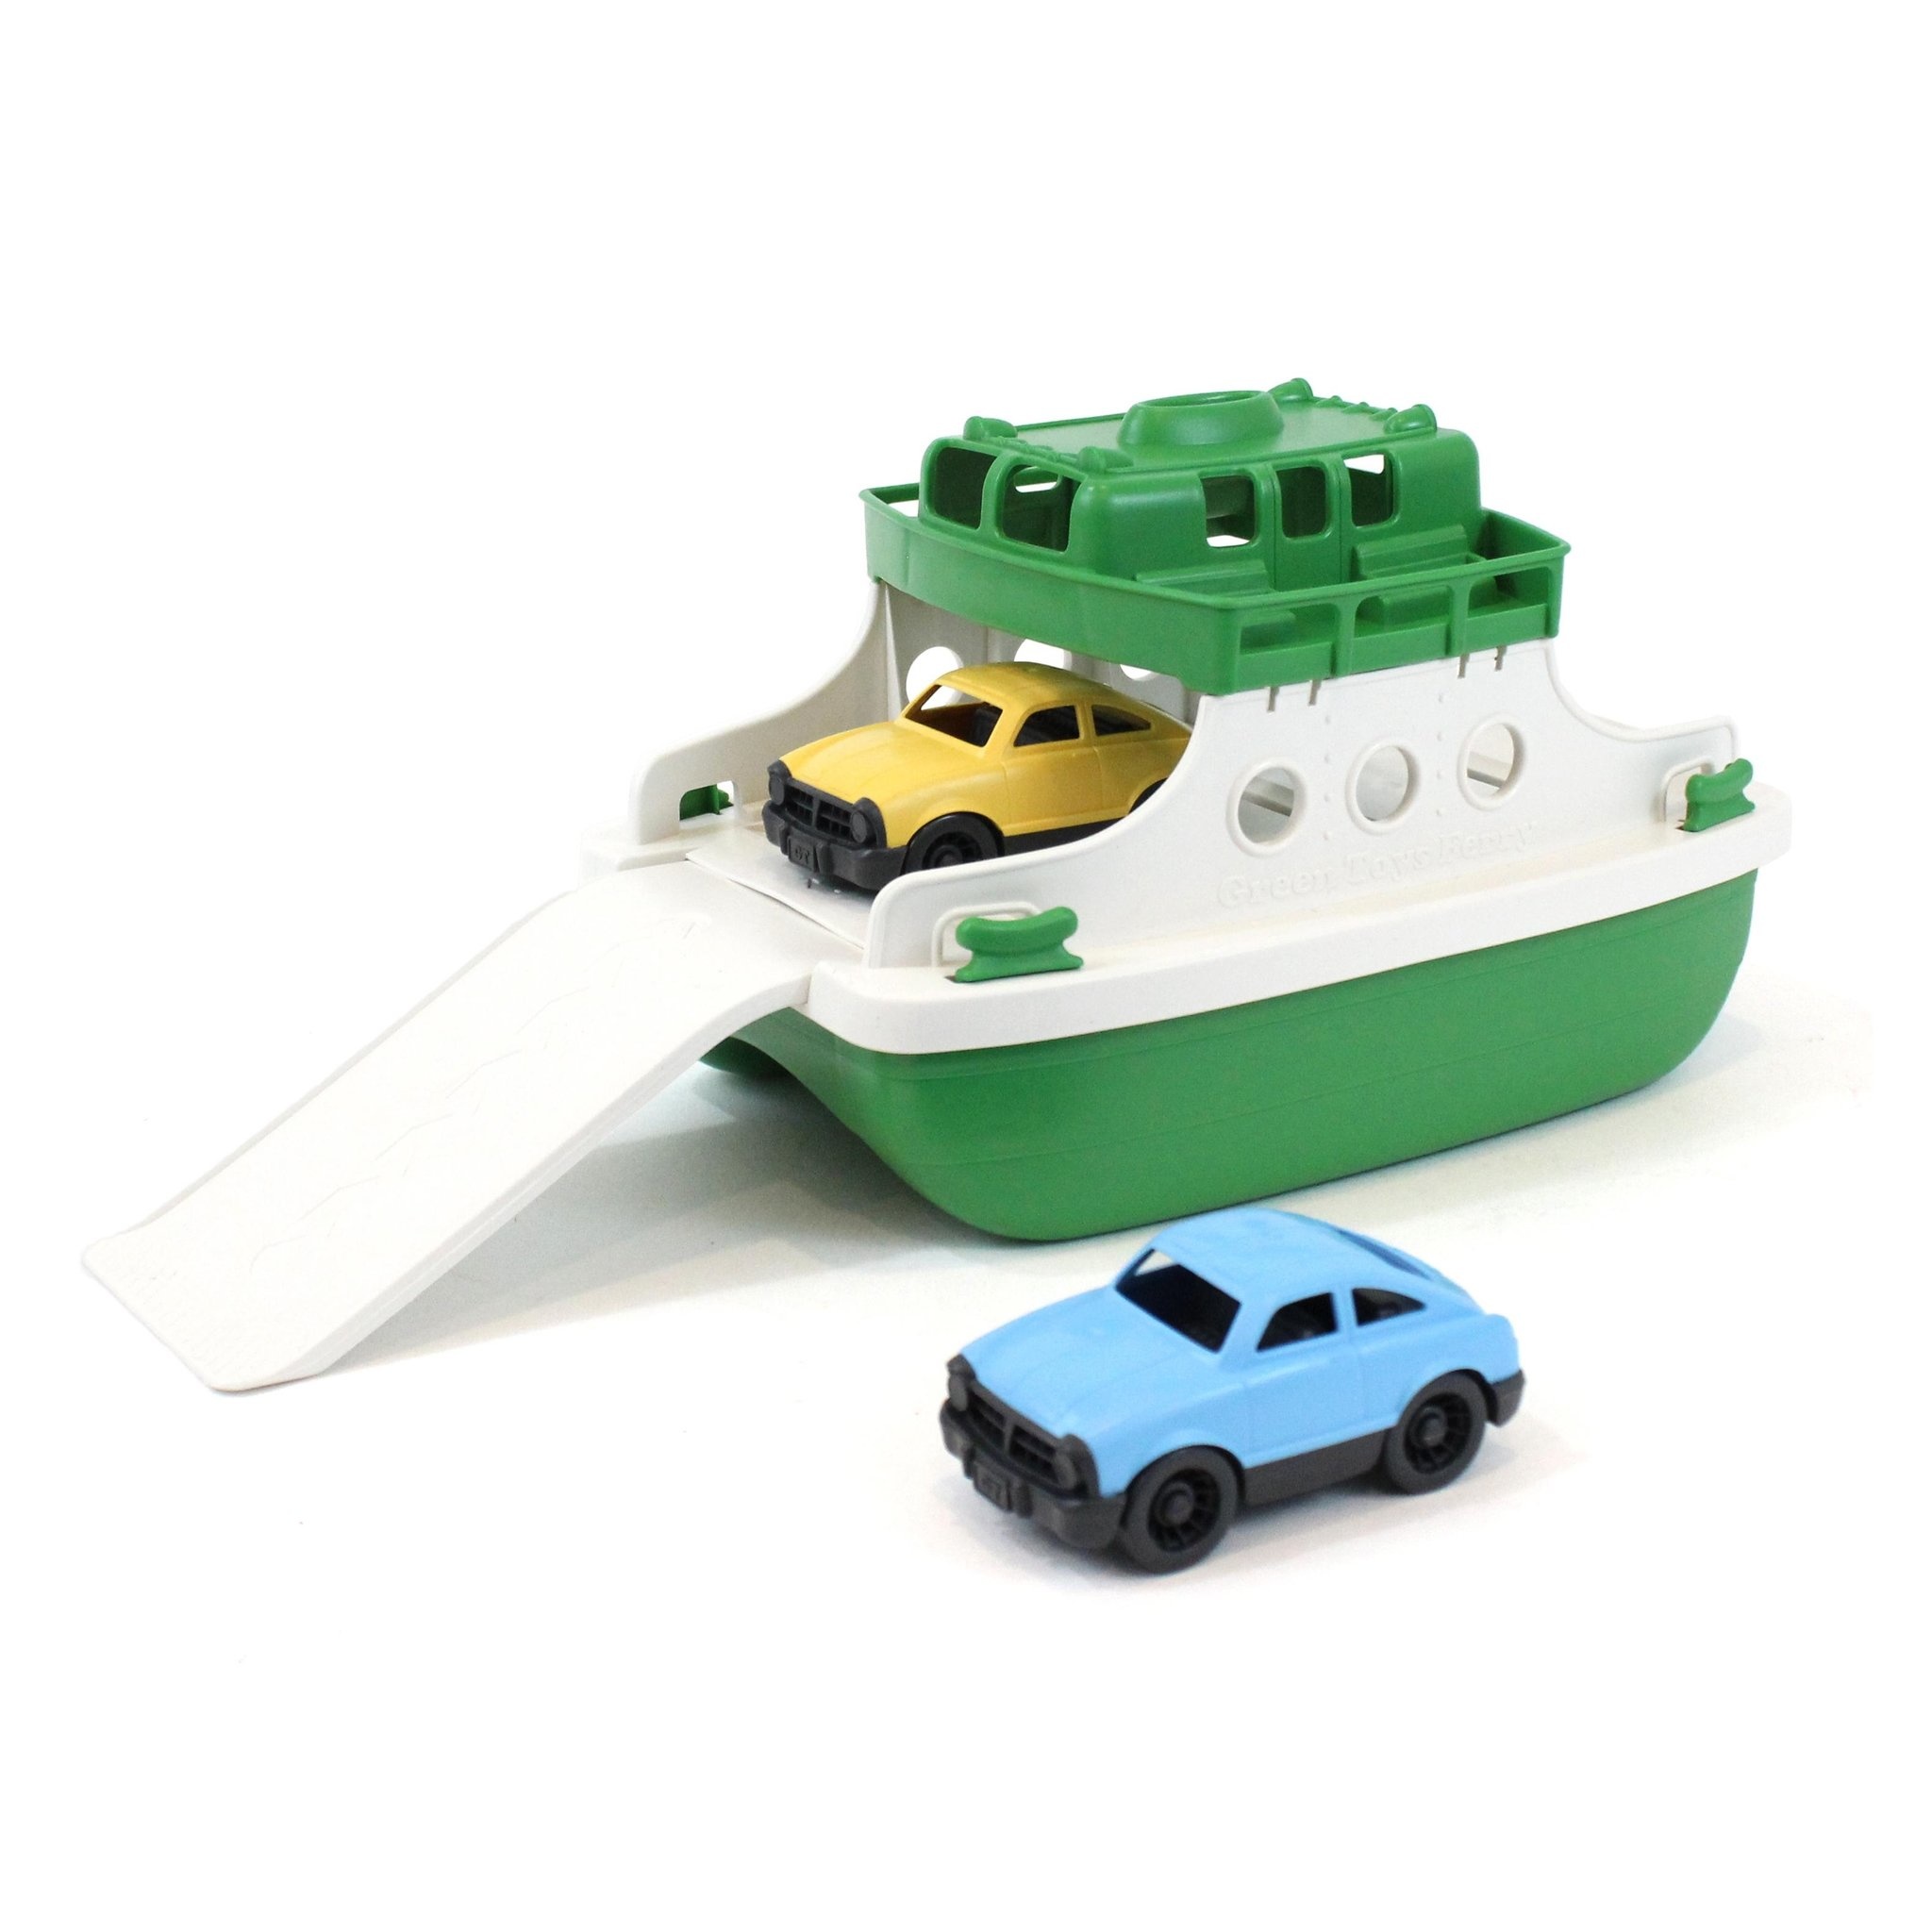 toy ferry boat